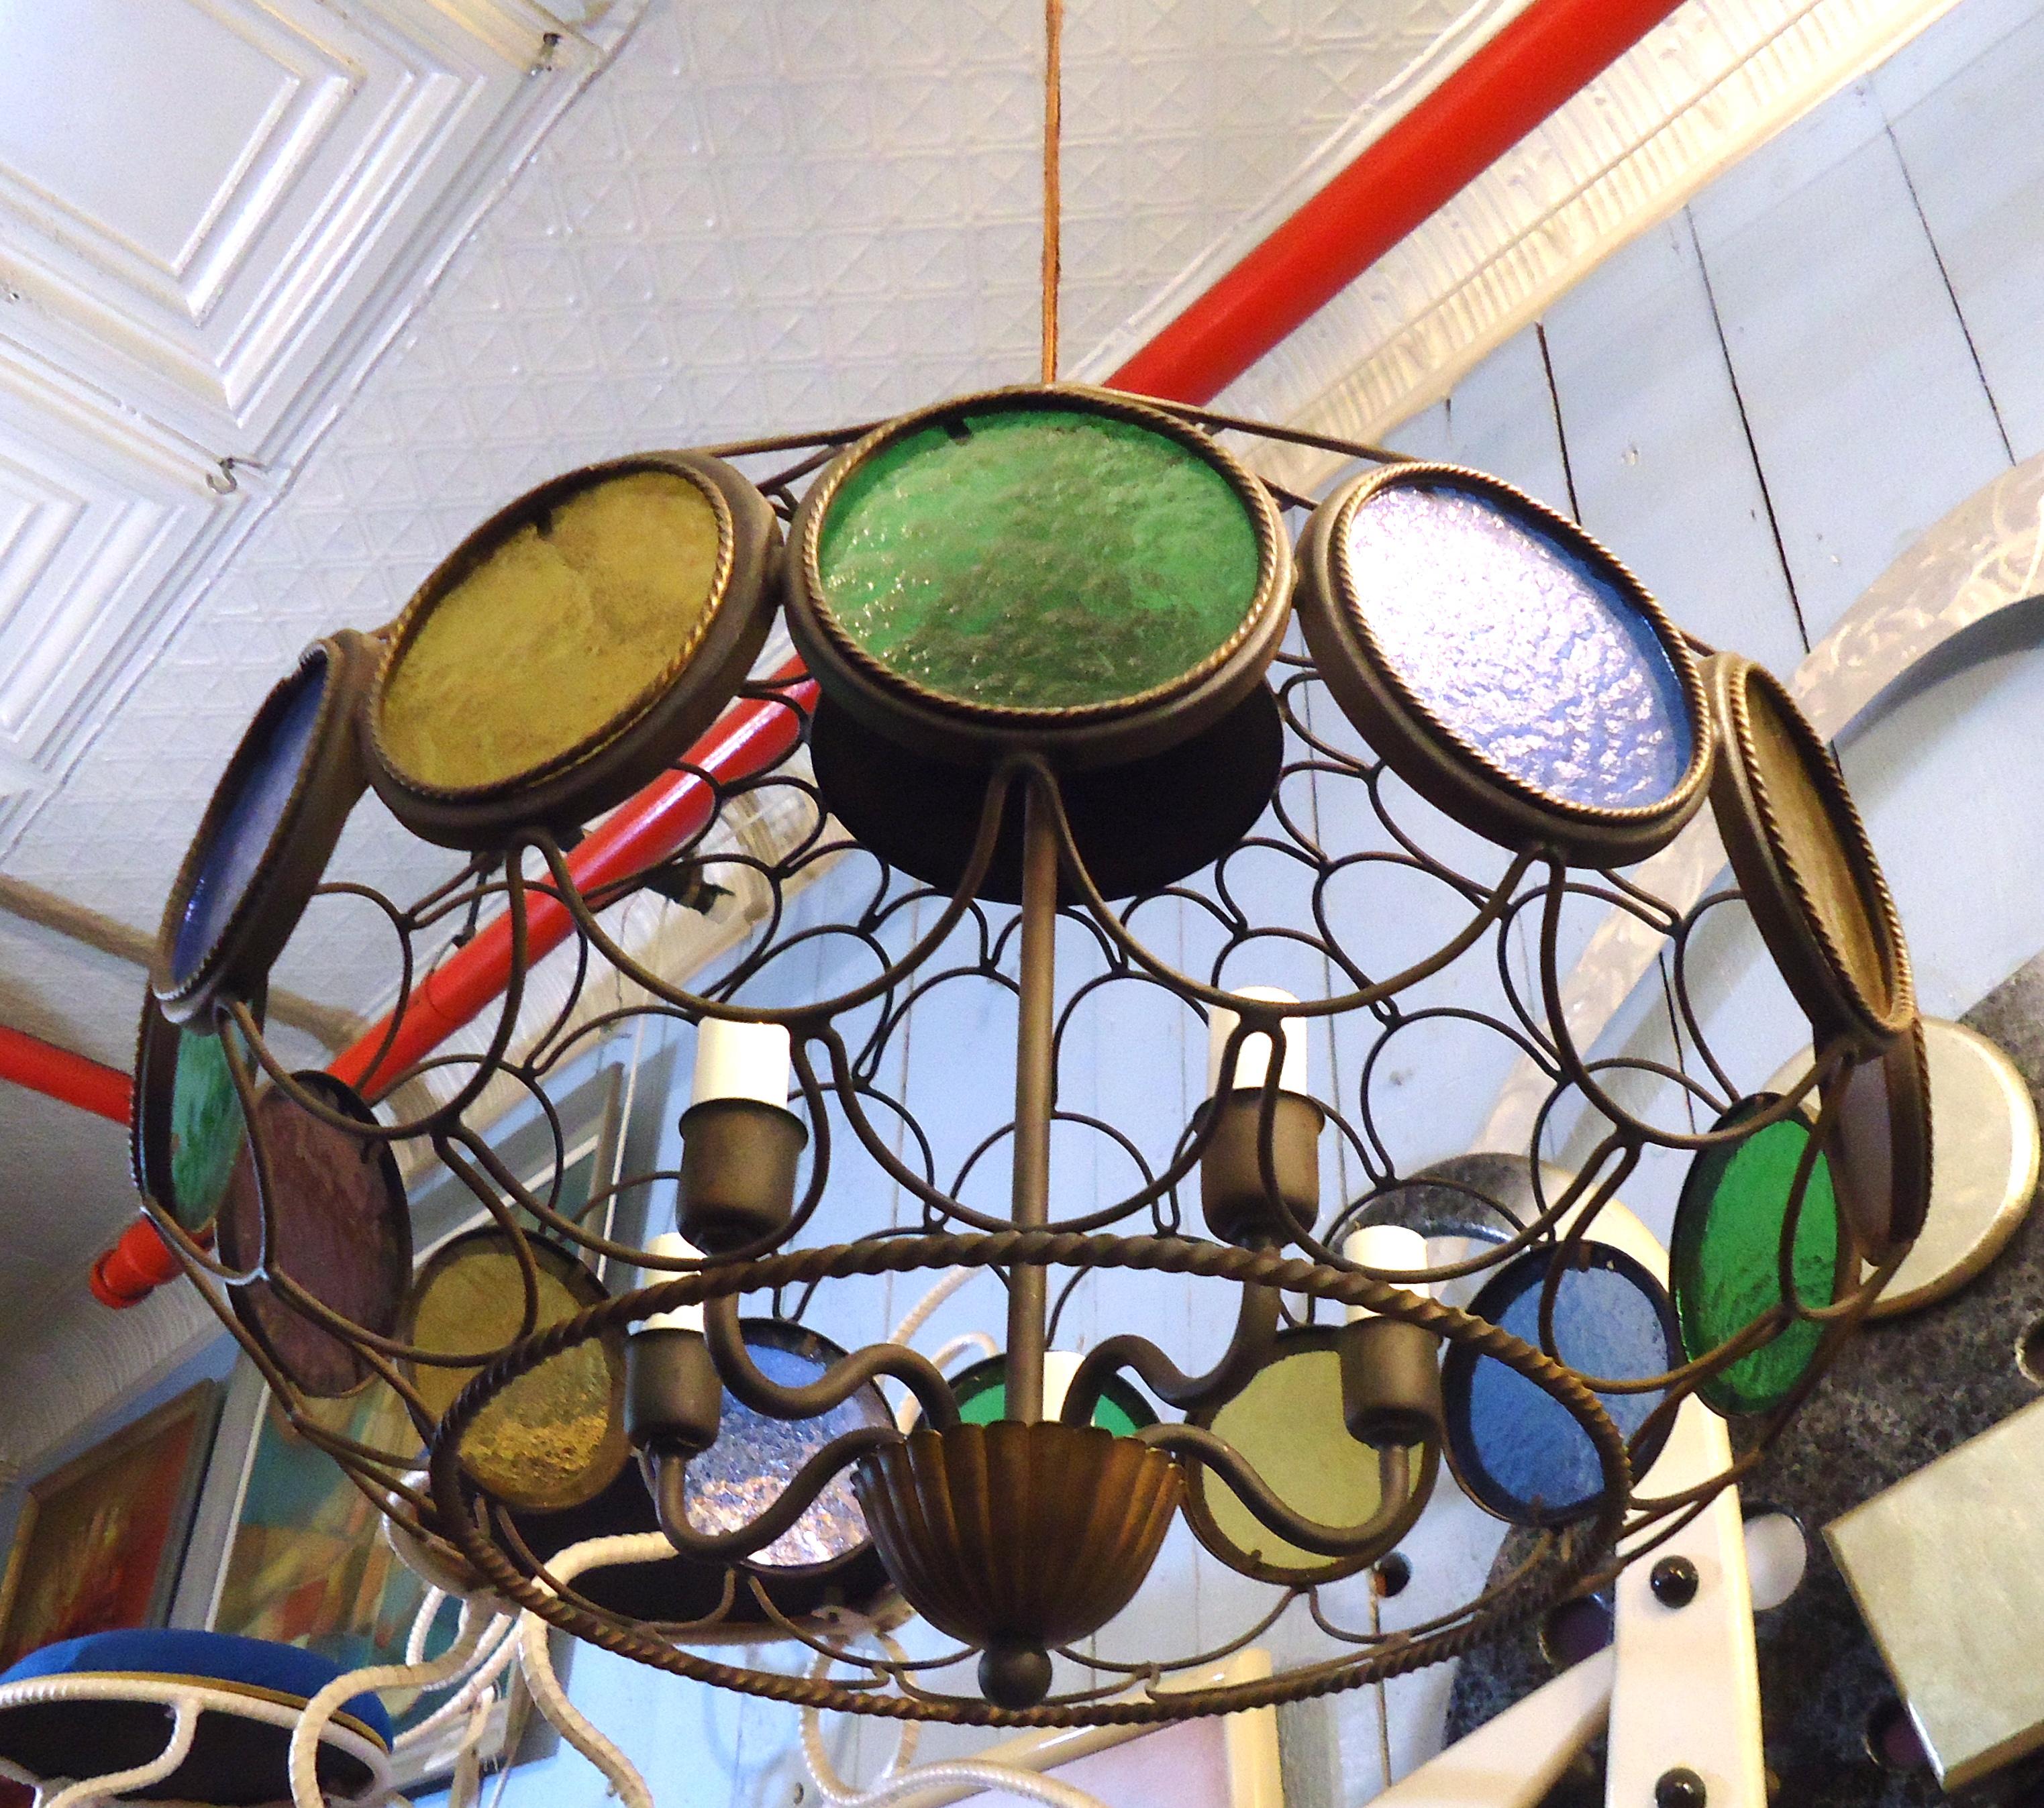 Mid-Century Modern Italian style chandelier features stained glass accents within a metal oval framed dome.
(Please confirm item location - NY or NJ - with dealer).